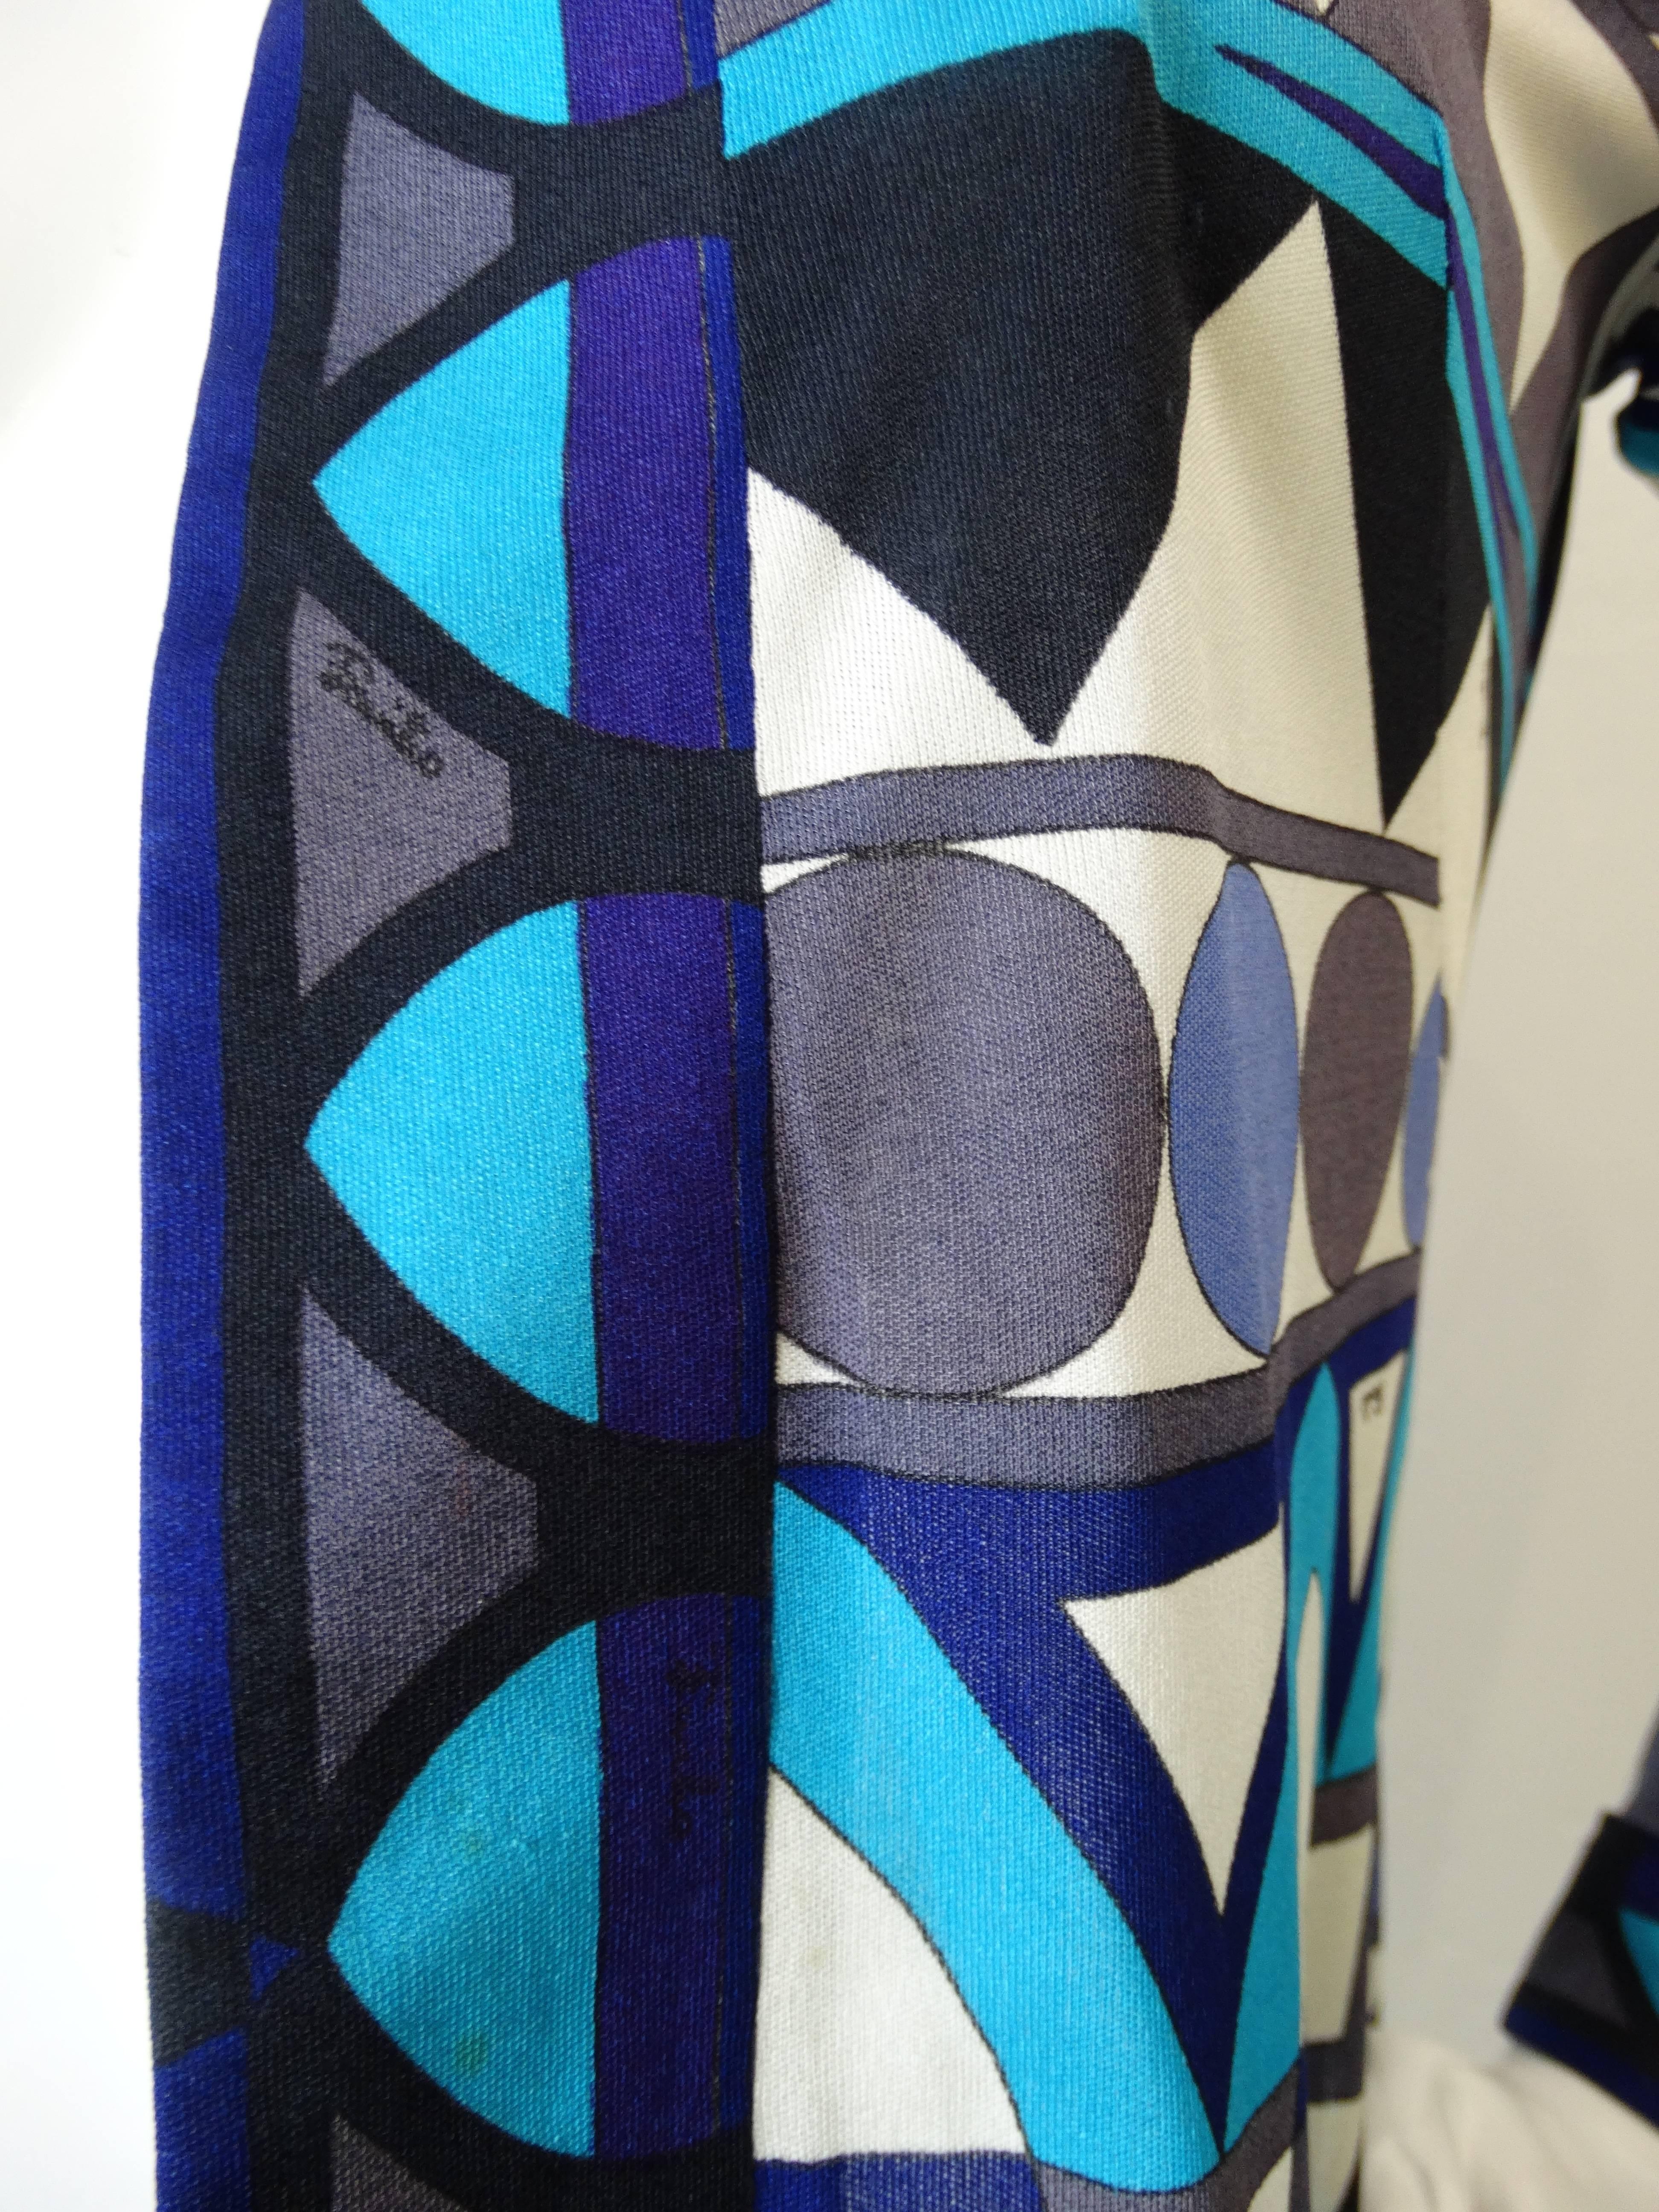 We are Pucci obsessed and you will be too with our amazing 1970s Pucci cardigan! Open construction cardigan silhouette with intricate, oh so Pucci geometric print. Shades of blue, black, purple and white. Slightly flared sleeves give some 1970s